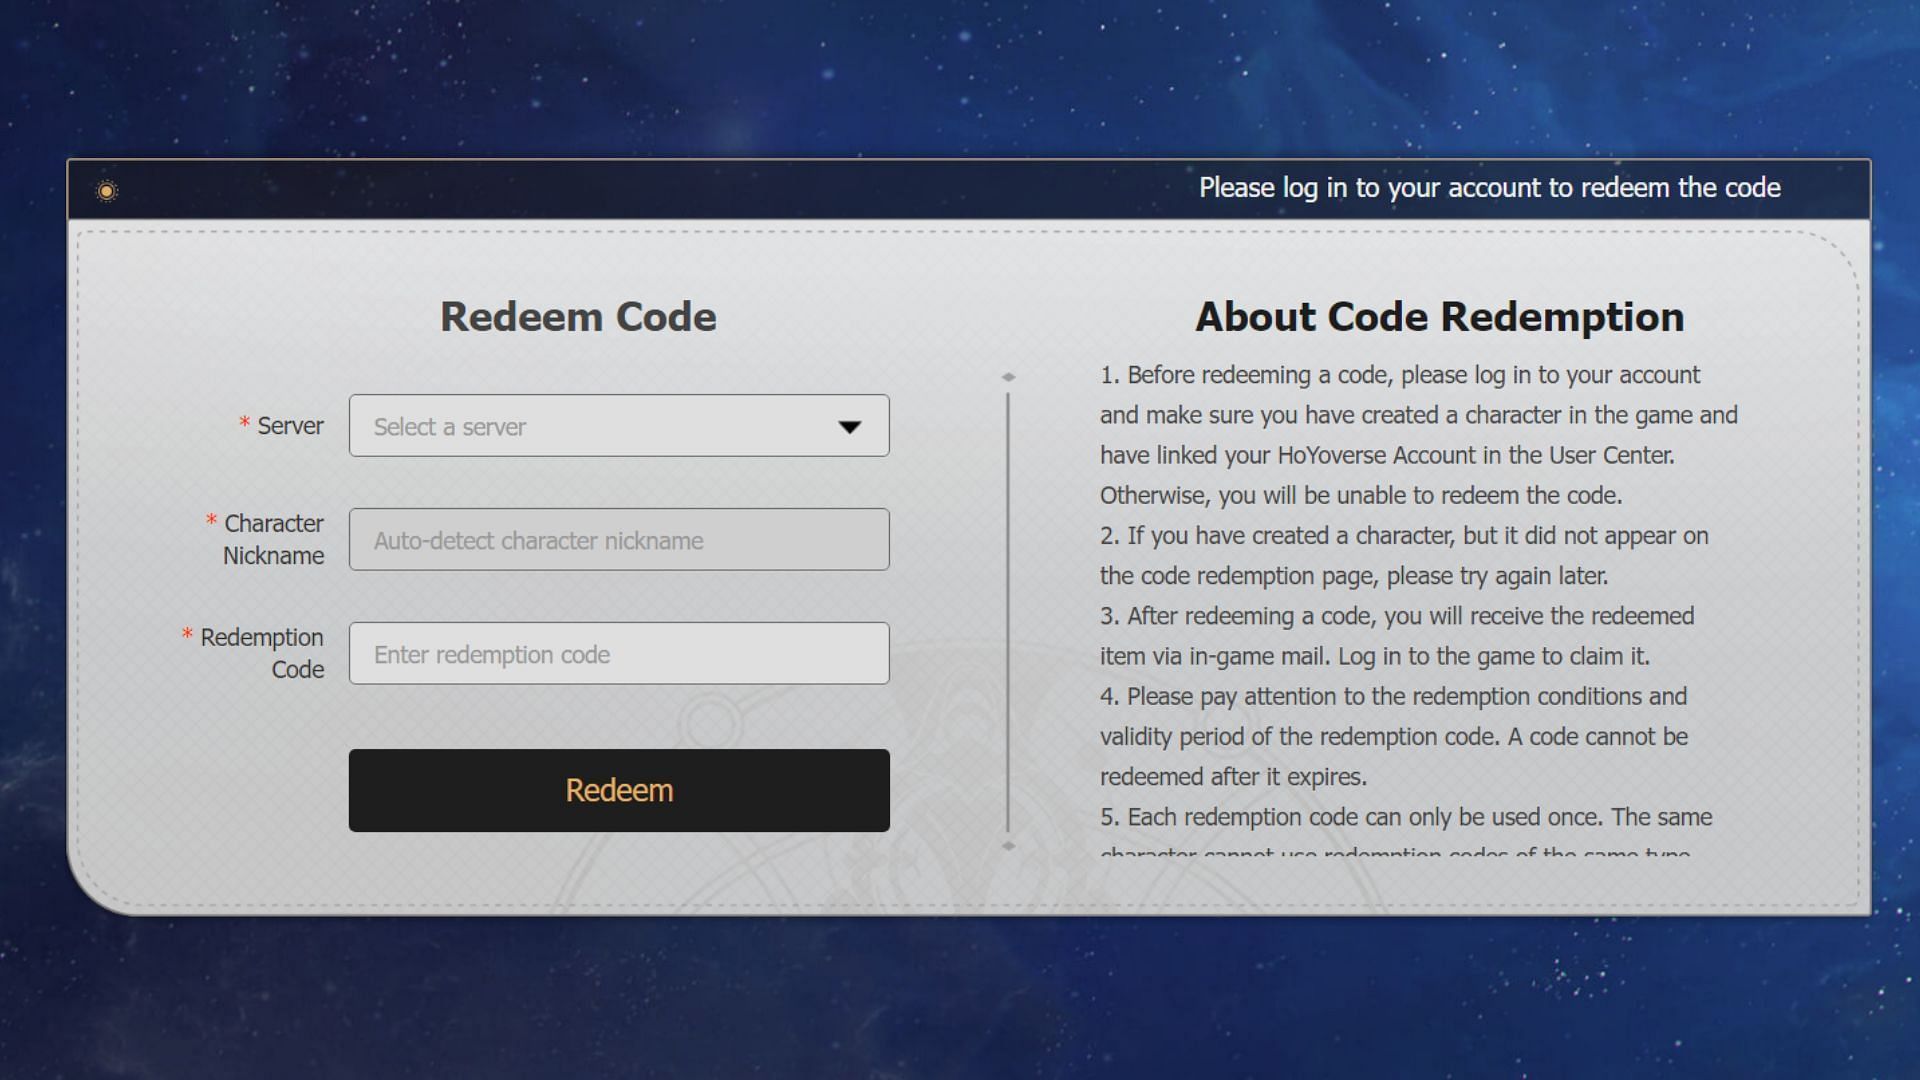 Official code redemption webpage (Image via HoYoverse)